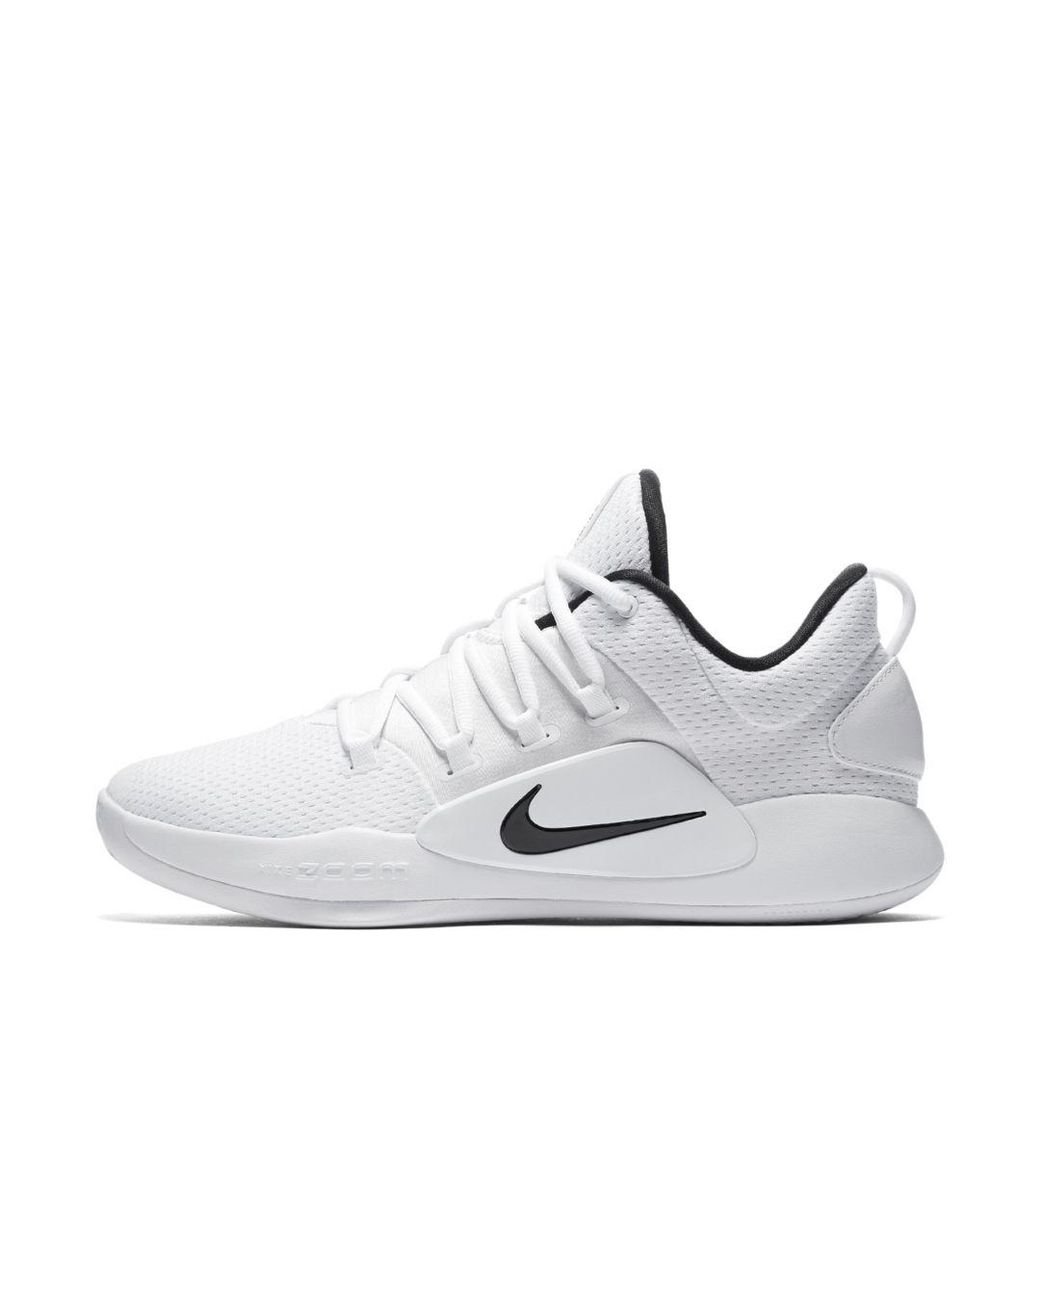 tonight digestion relaxed Nike Hyperdunk X Low Basketball Shoes in White/Black (White) for Men | Lyst